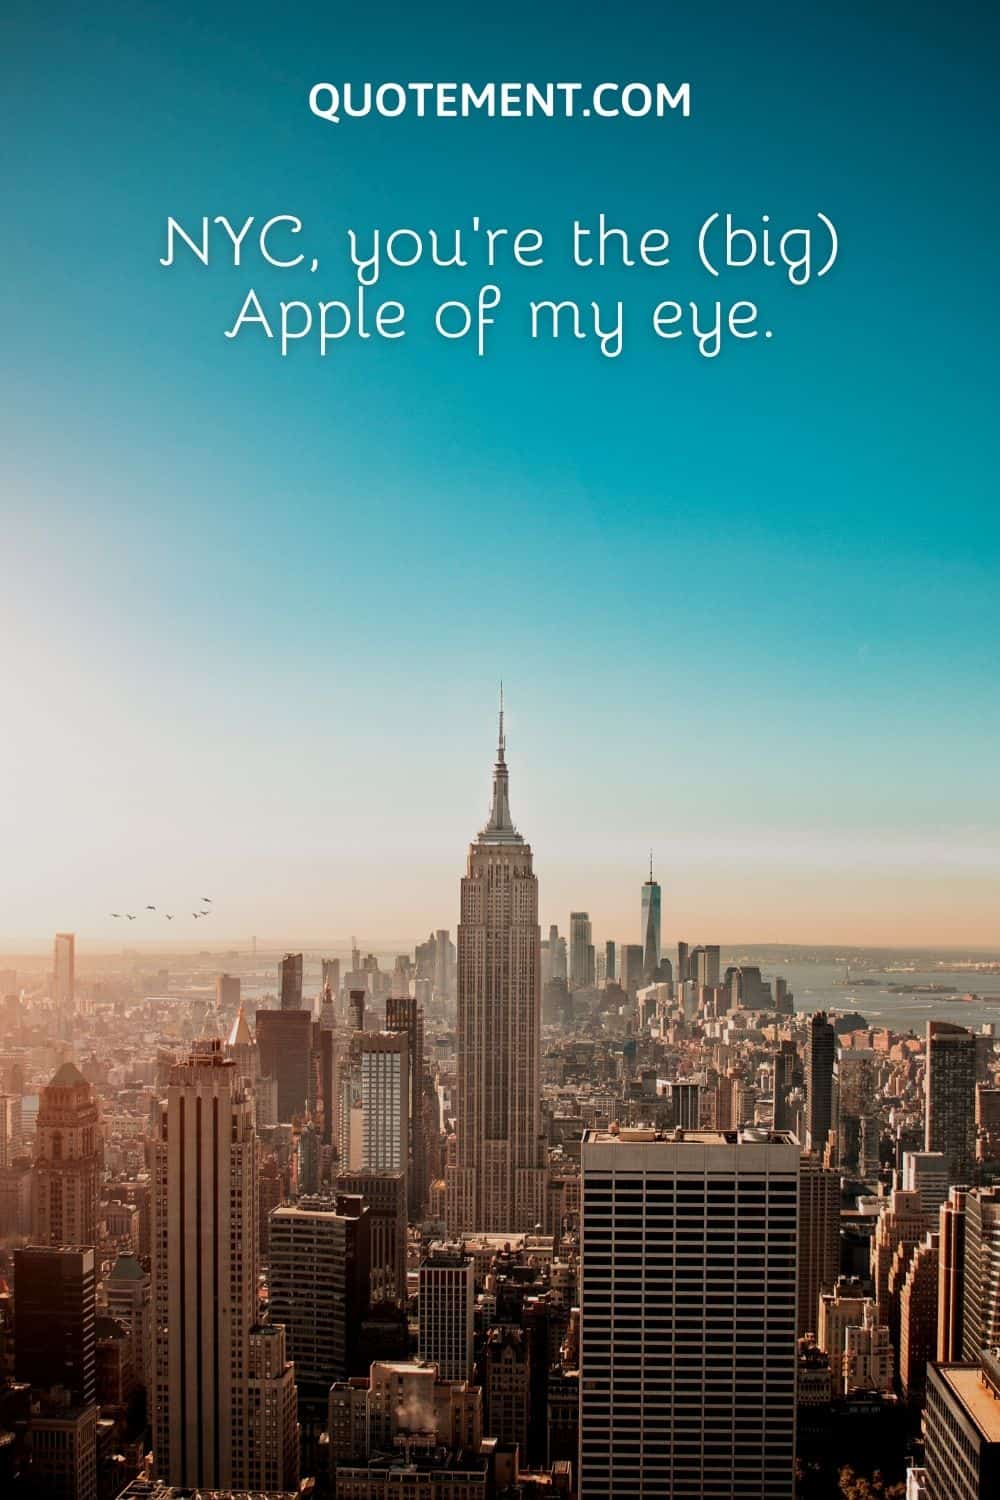 NYC, you’re the (big) Apple of my eye